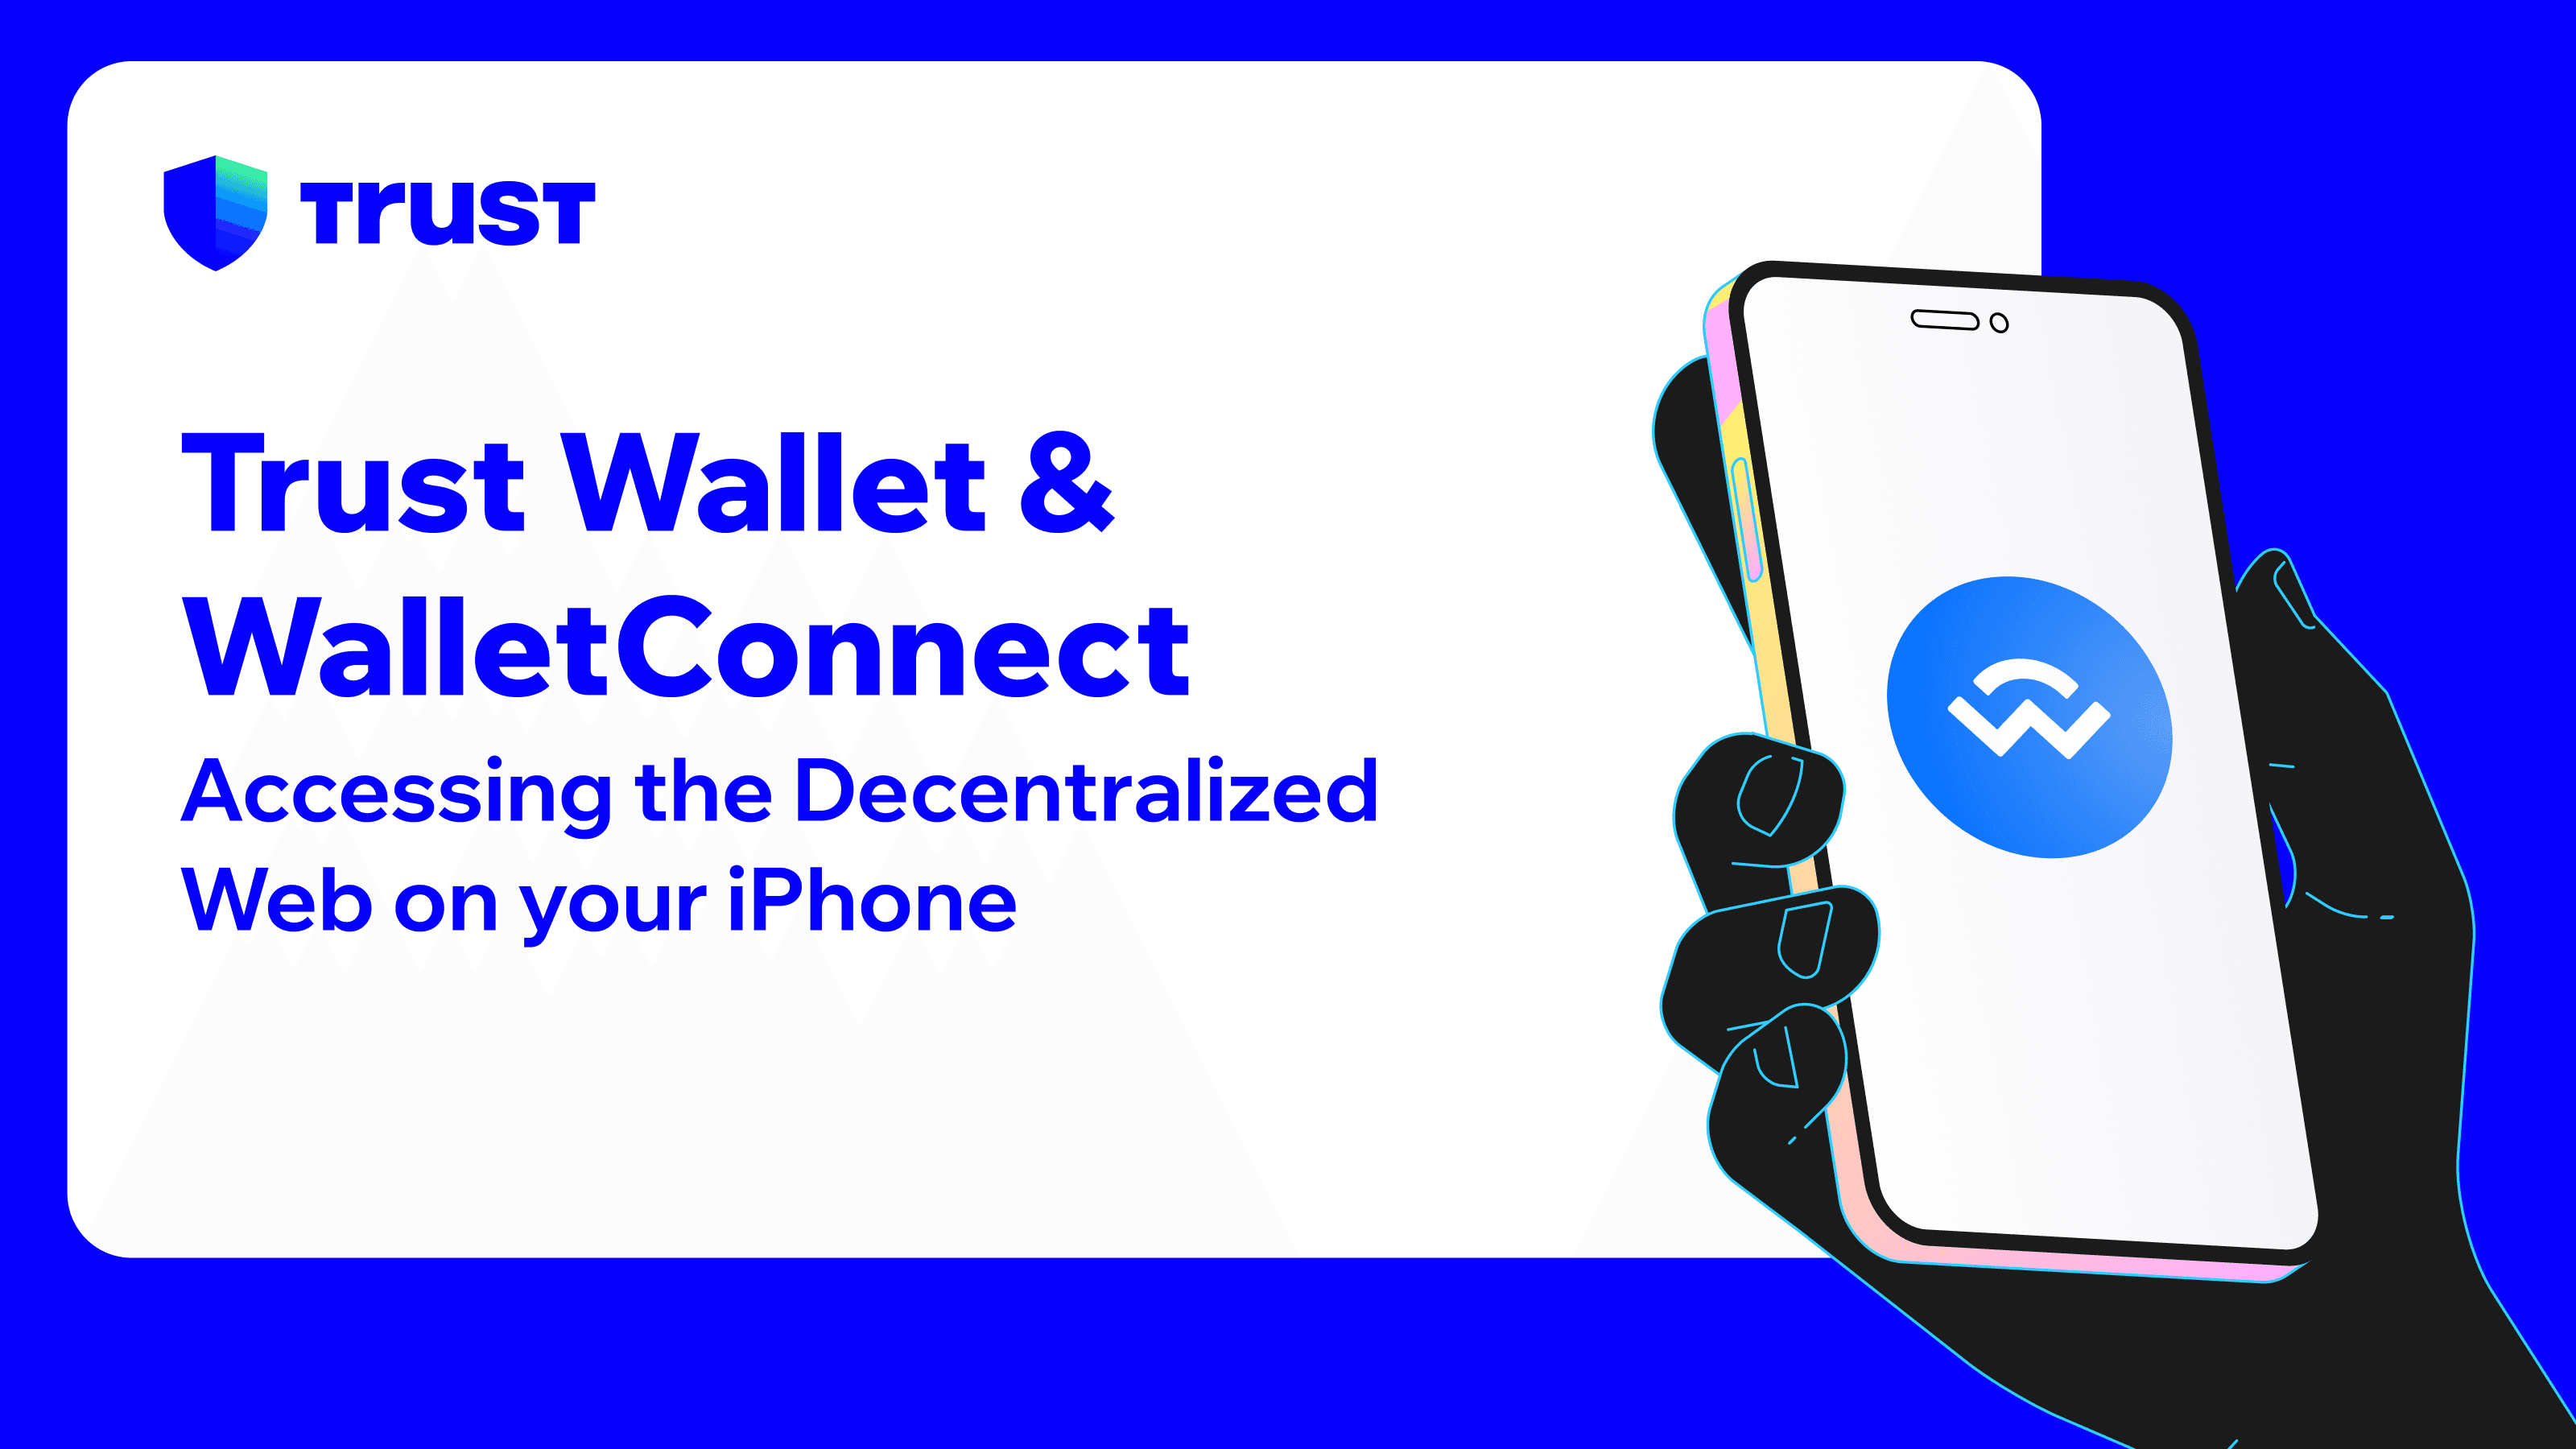 Trust Wallet & WalletConnect - Accessing the Decentralized Web on your iPhone